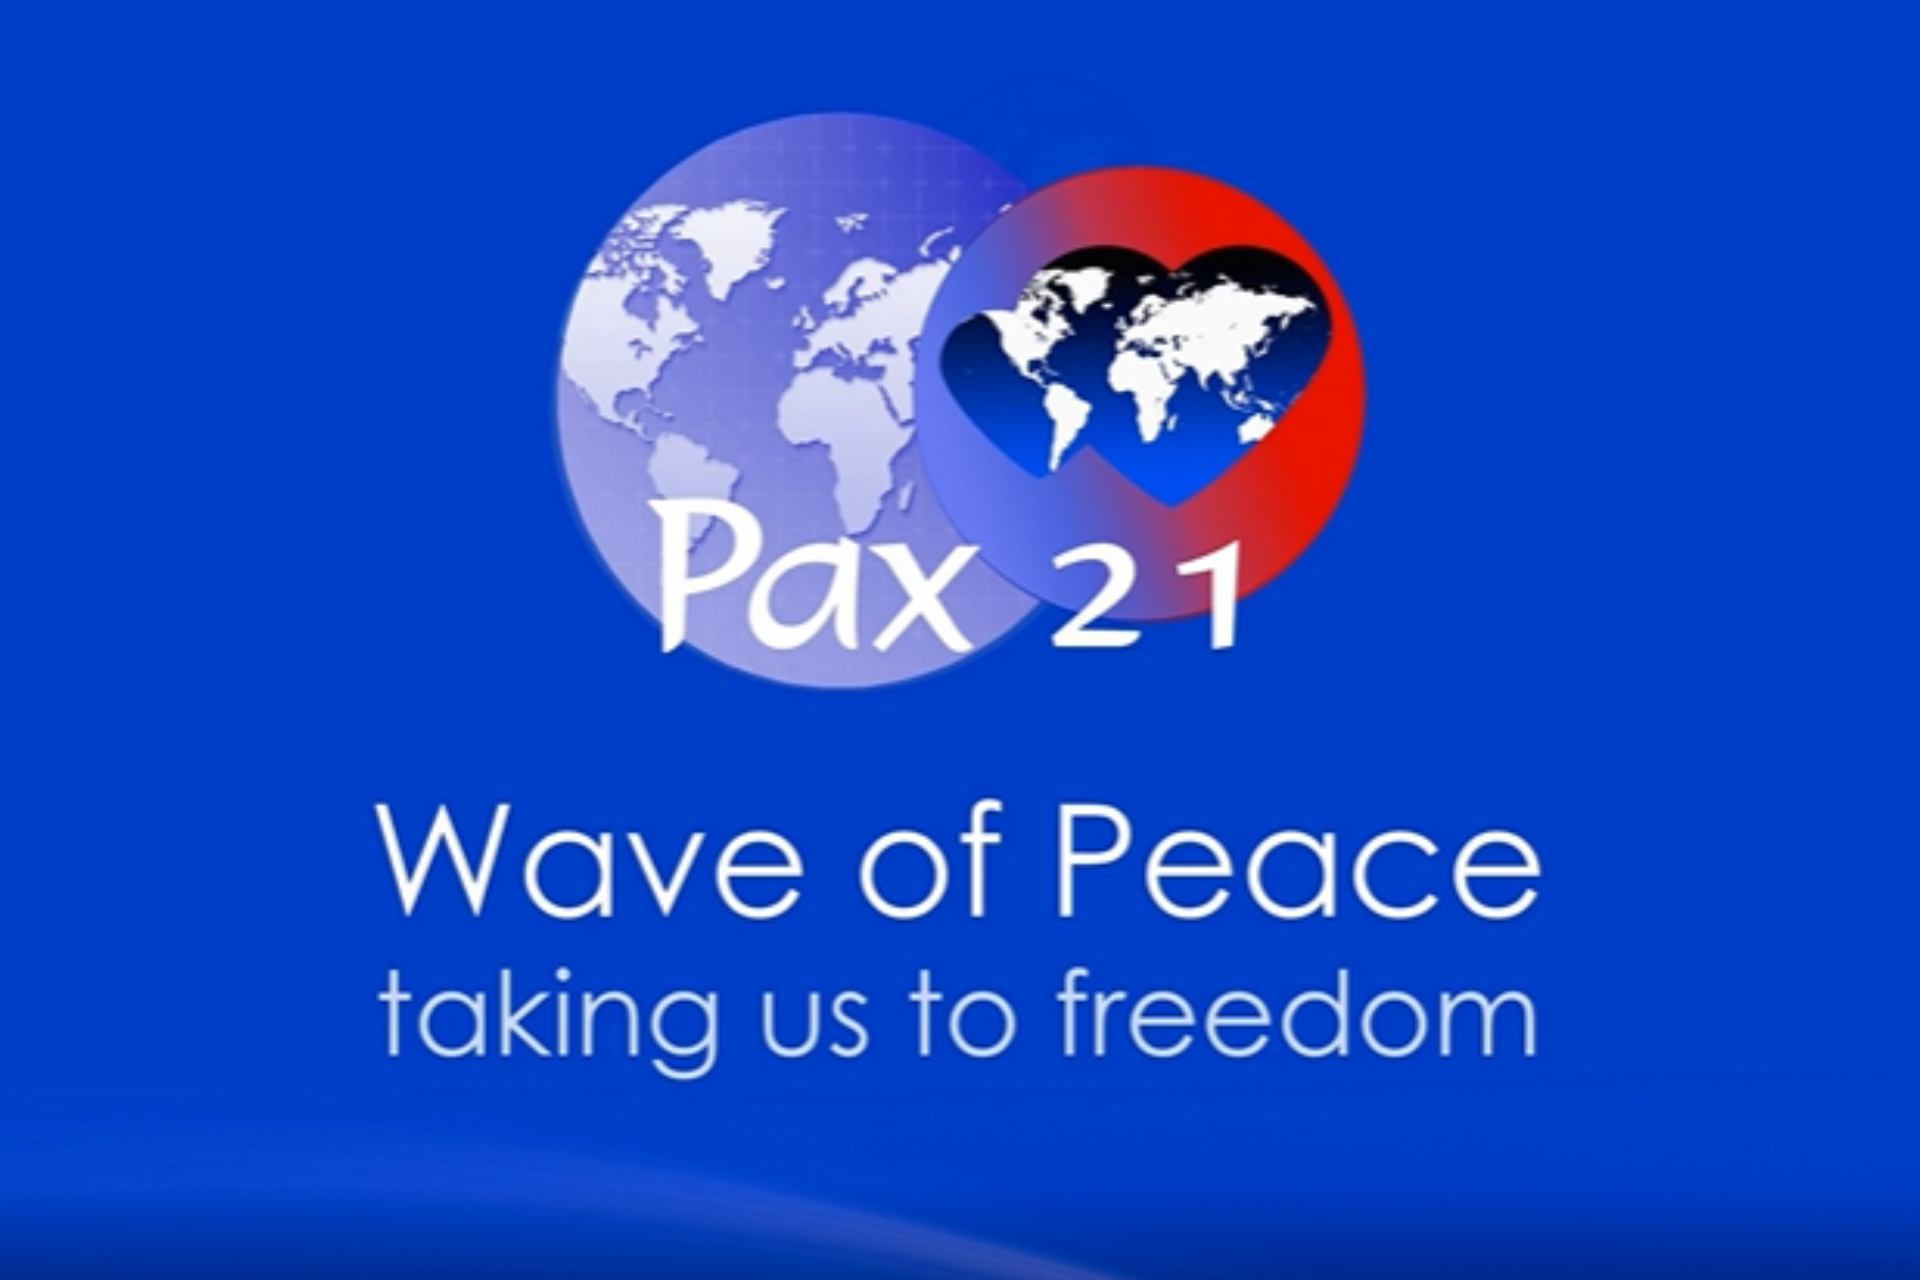 Pax 21 - Wave of Peace